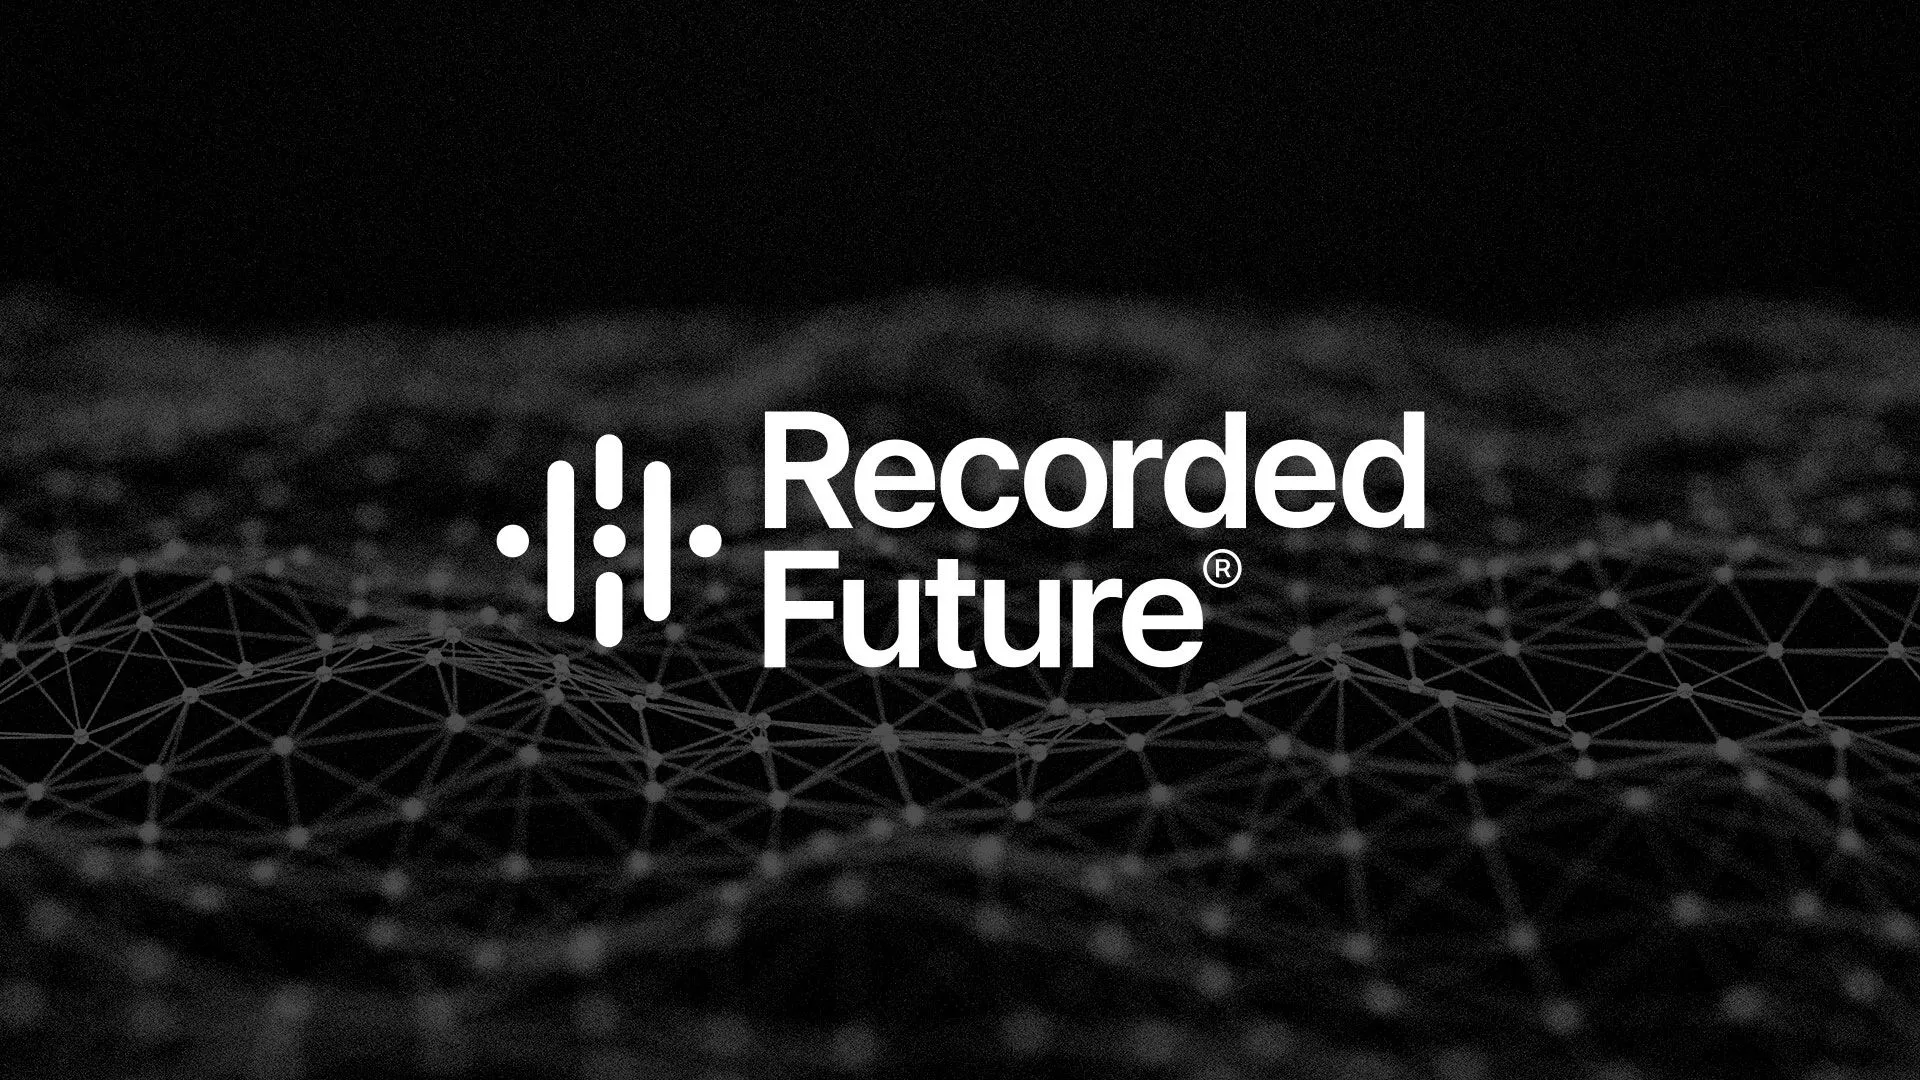 Recorded Future to Provide Free Access to Elite Intelligence Through New Browser Extension